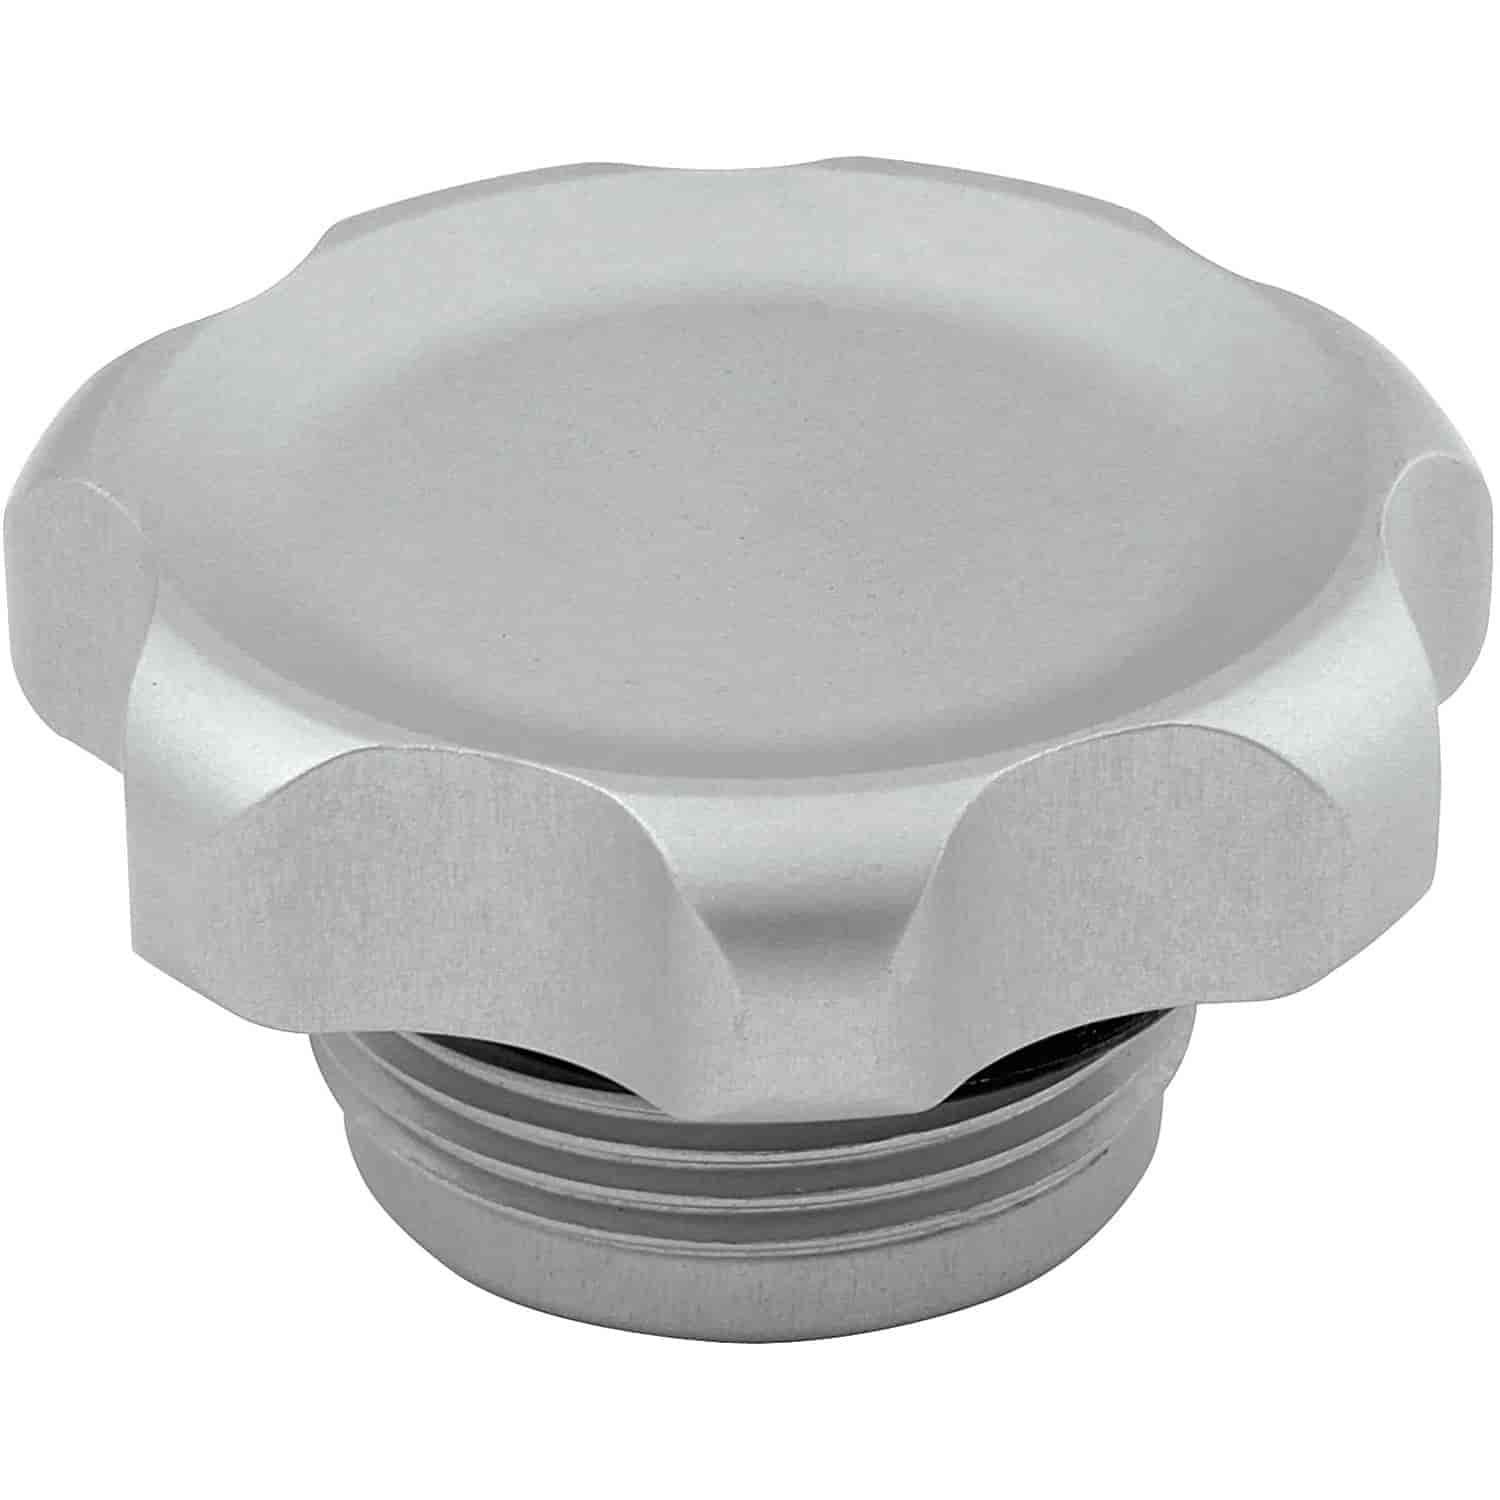 Replacement Filler Cap For Small Fill Plug Kits